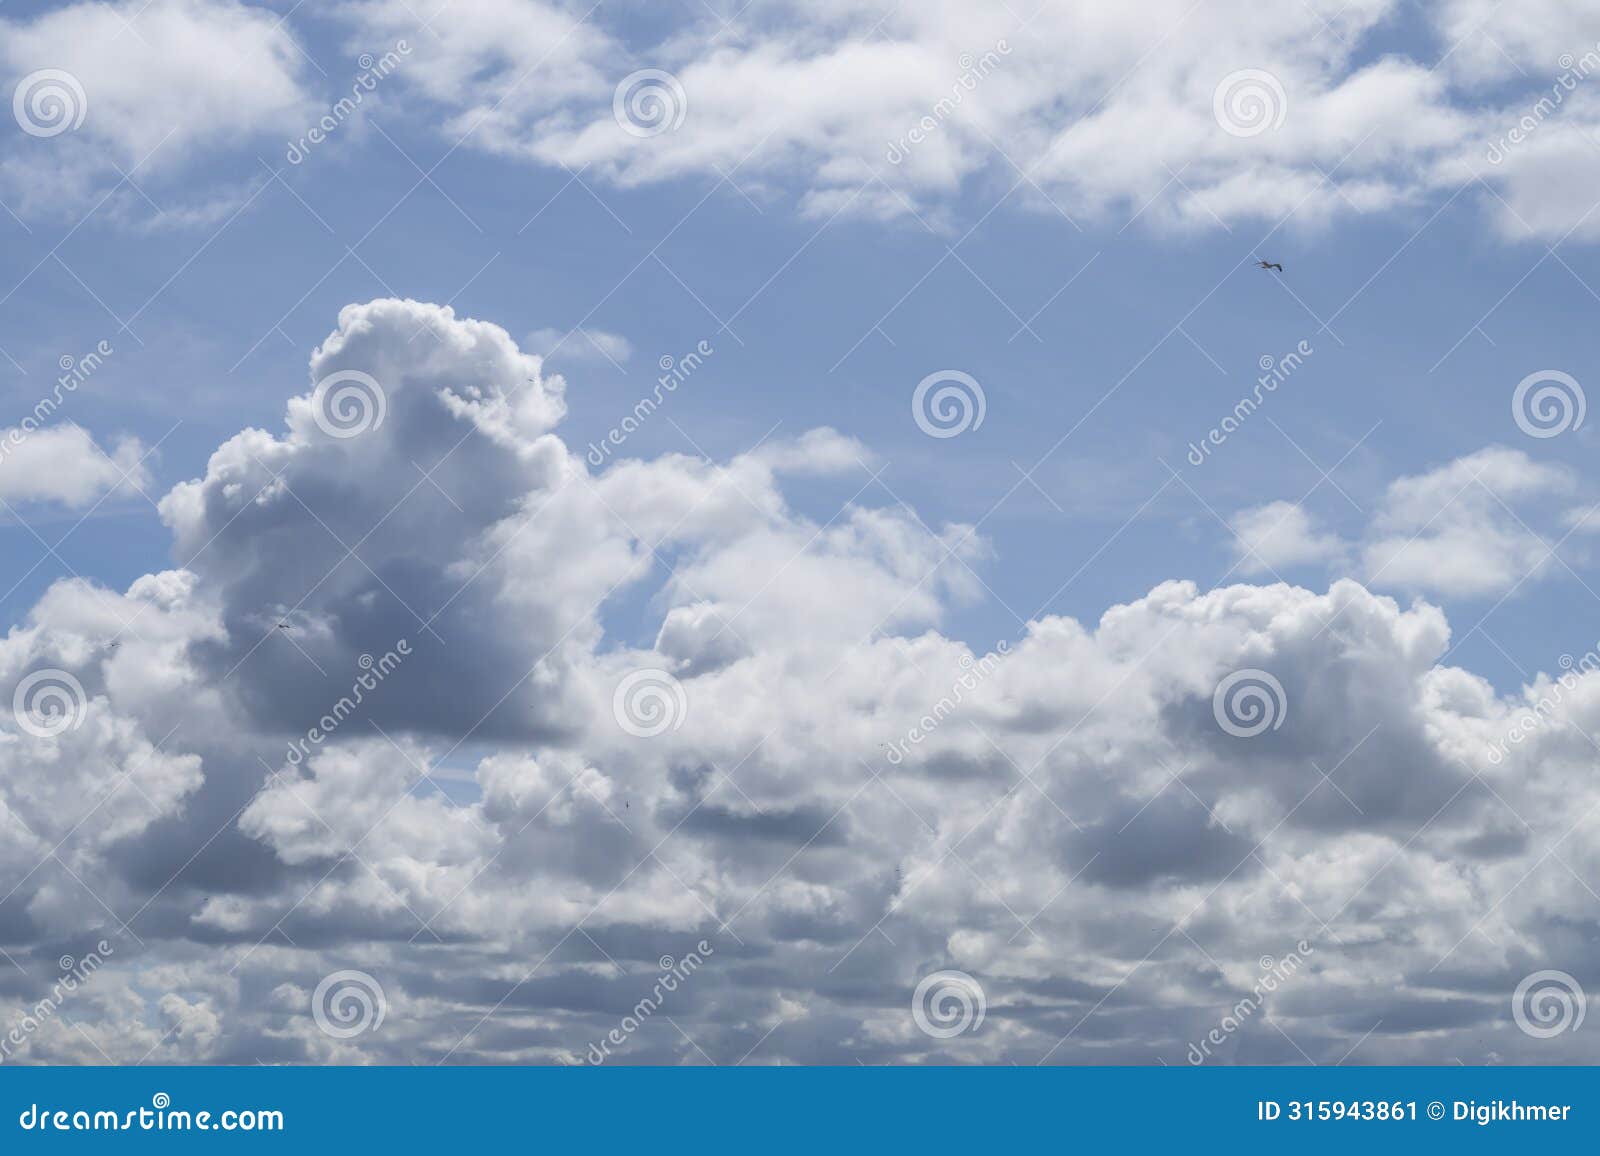 beautiful cloudscape blue gradient with seagulls and birds